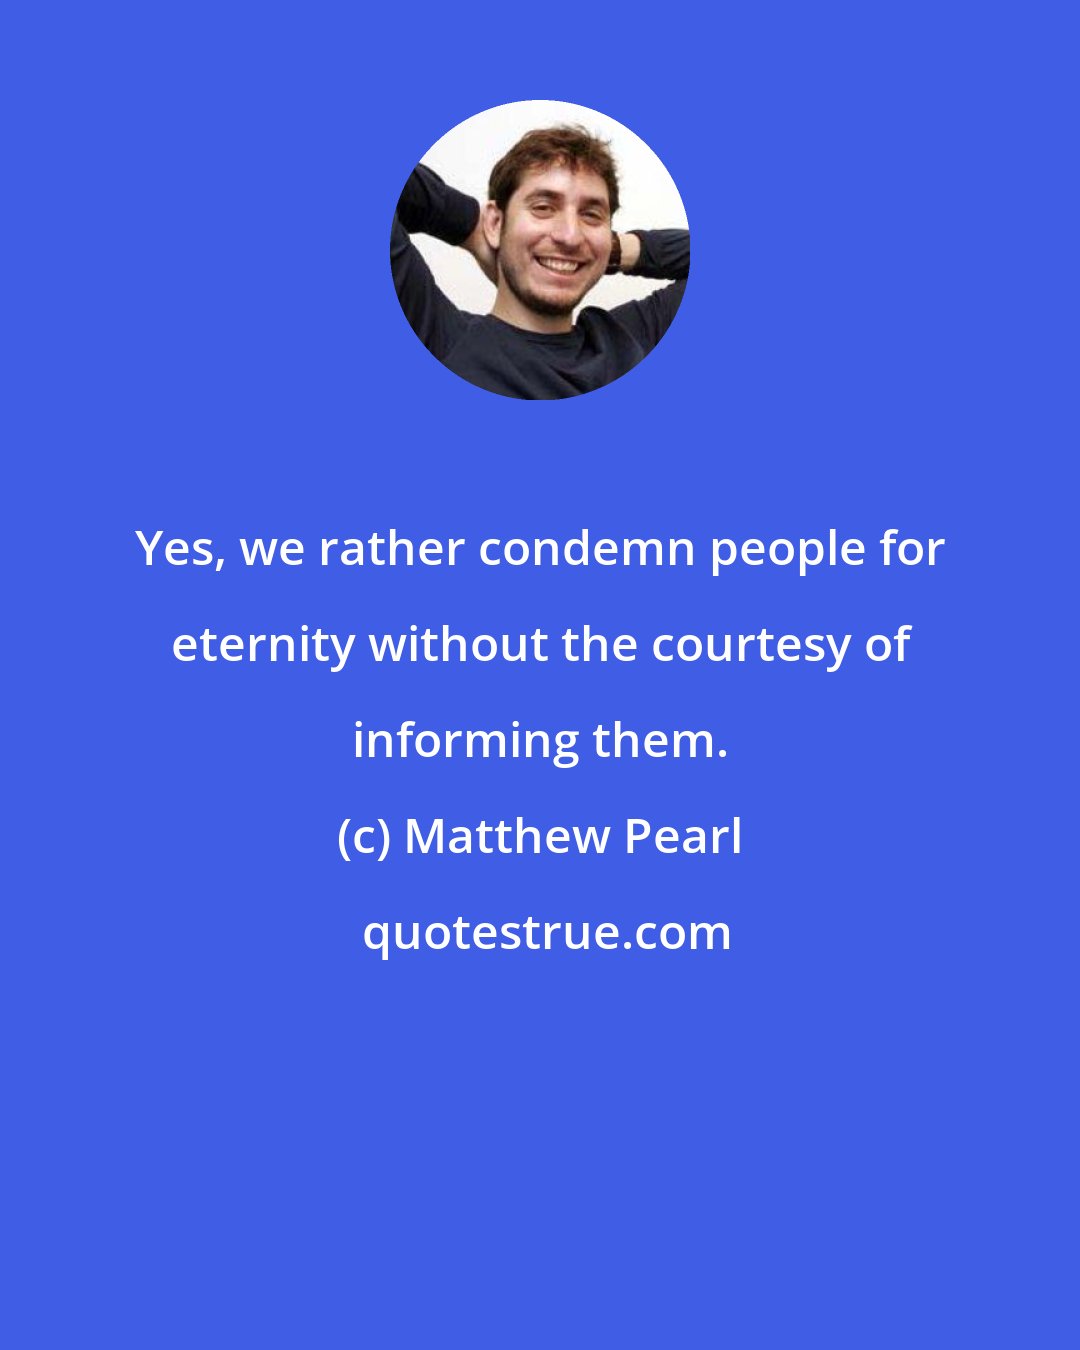 Matthew Pearl: Yes, we rather condemn people for eternity without the courtesy of informing them.